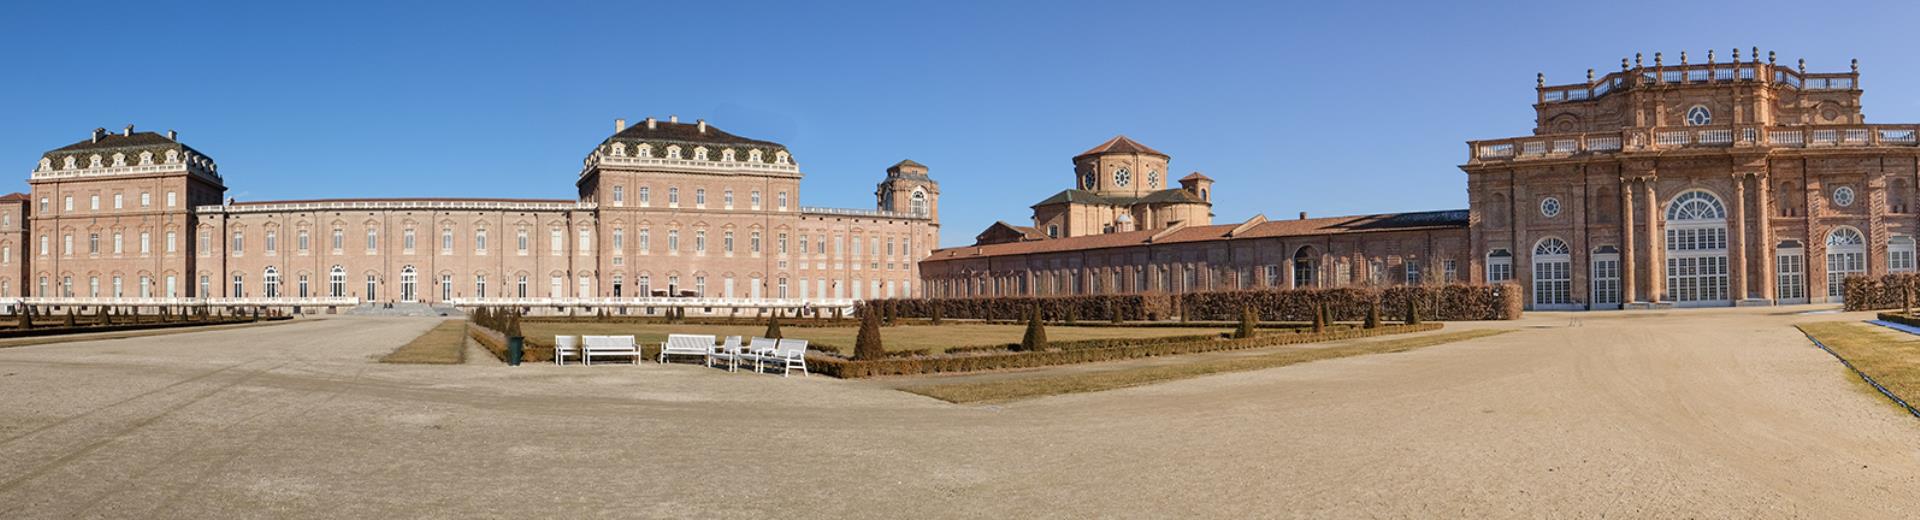 Visit the beautiful Royal Palace of Venaria Reale, very close to the Best Western Plus Hotel Le Rondini of San Francesco al Campo. Discover our offers!